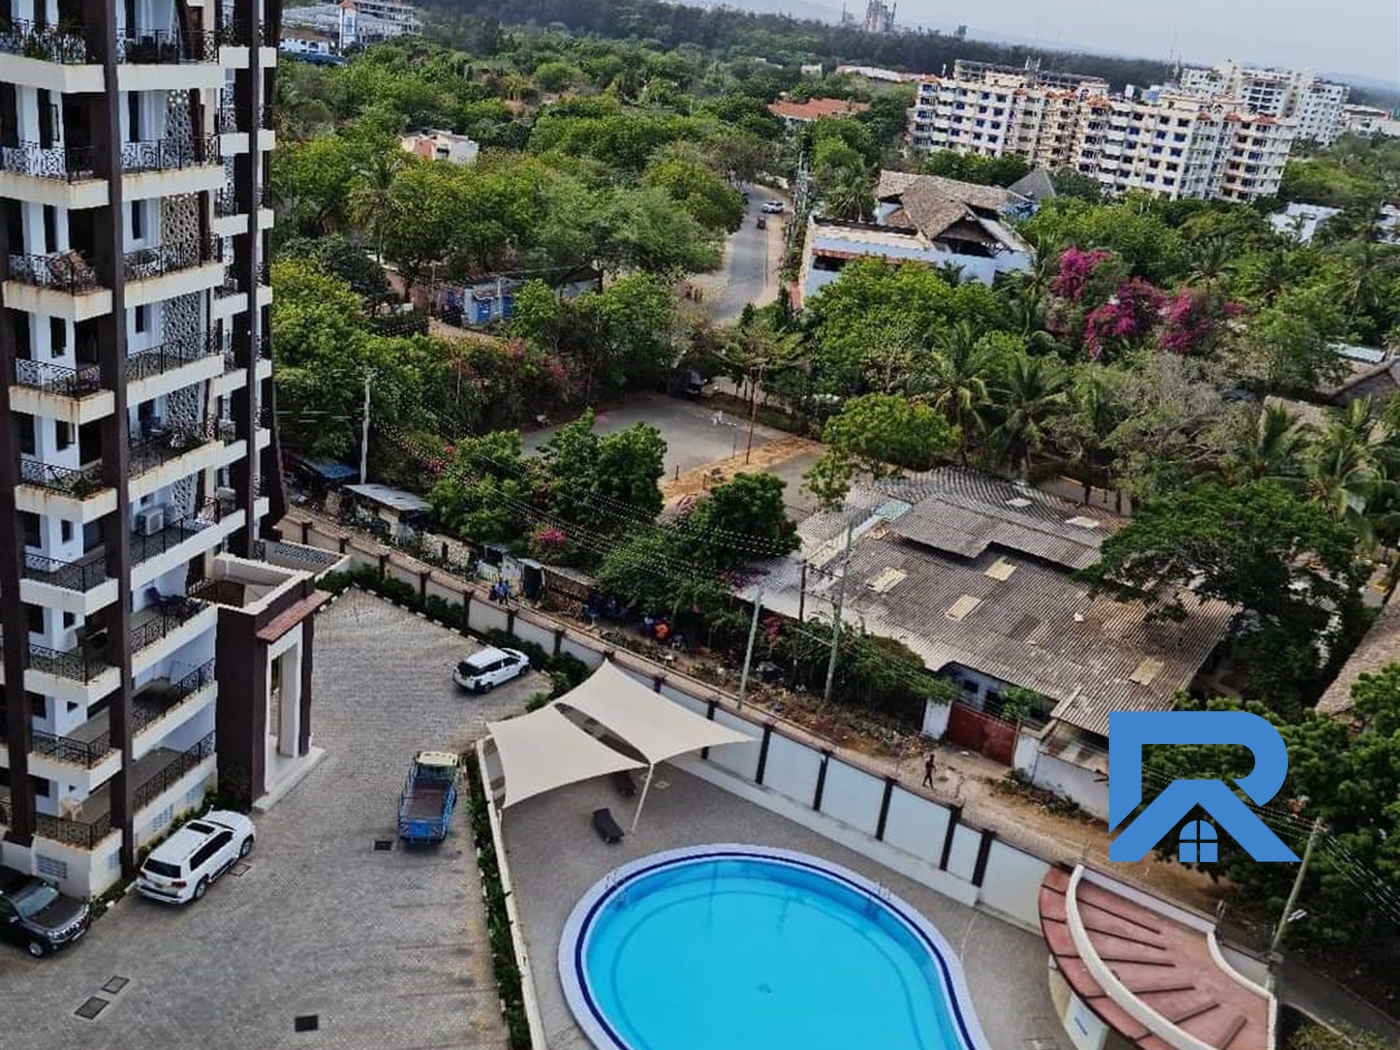 Apartment for rent in Mombasa International